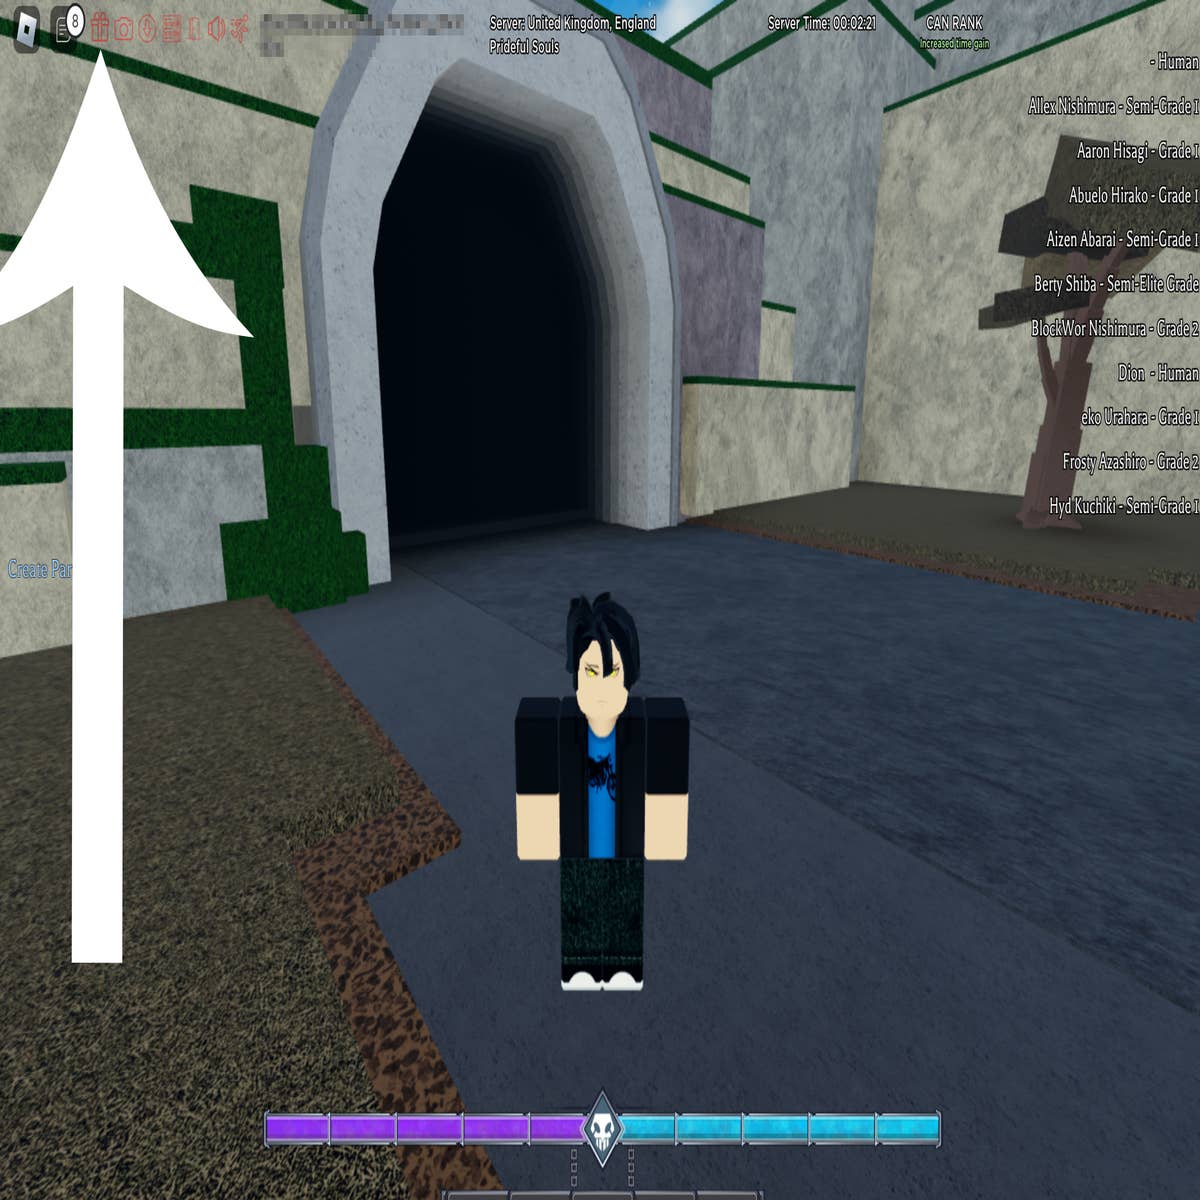 *NEW* ALL WORKING CODES FOR SOUL WAR IN 2022! ROBLOX